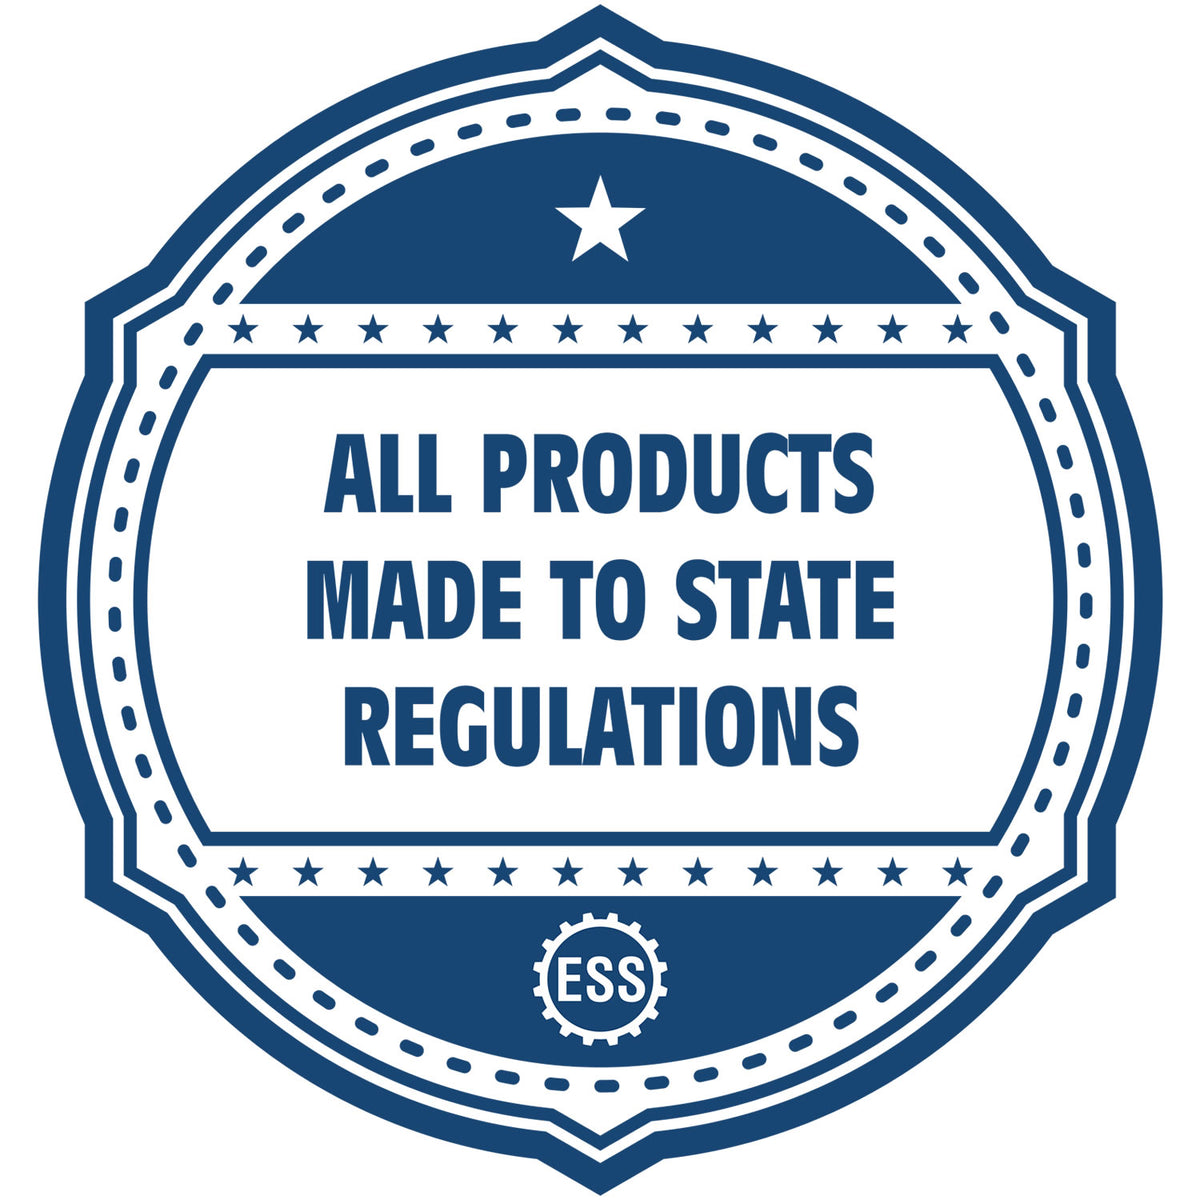 An icon or badge element for the Handheld New Hampshire Architect Seal Embosser showing that this product is made in compliance with state regulations.